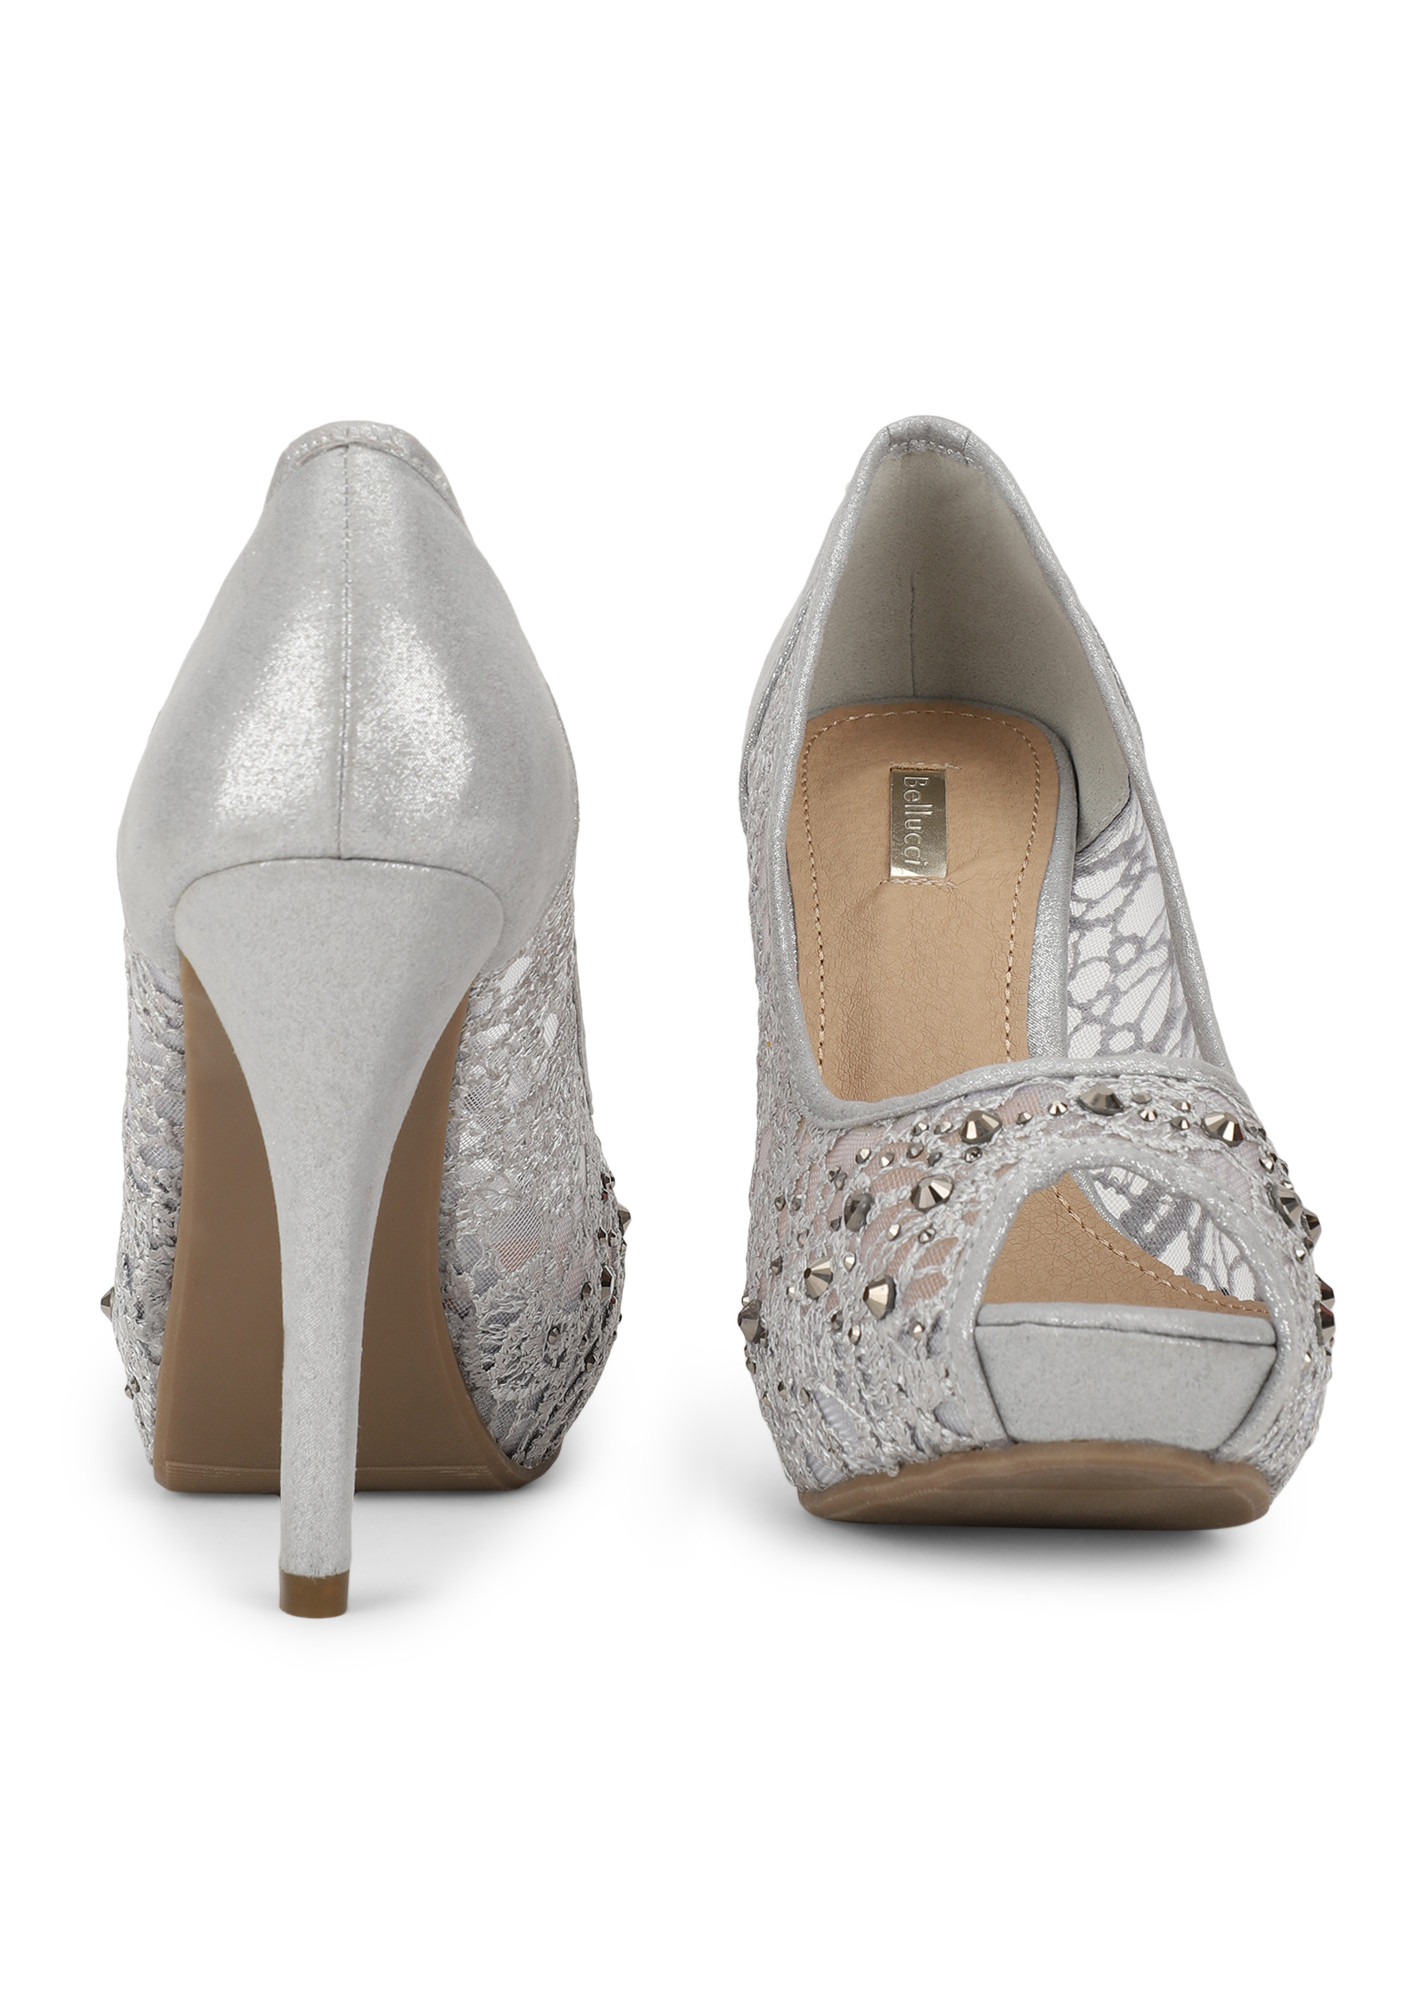 Mary G, Ultimate Collection Silver, Floral Detail, Peep-Toe Shoes UK6/EU39,  VGC | eBay